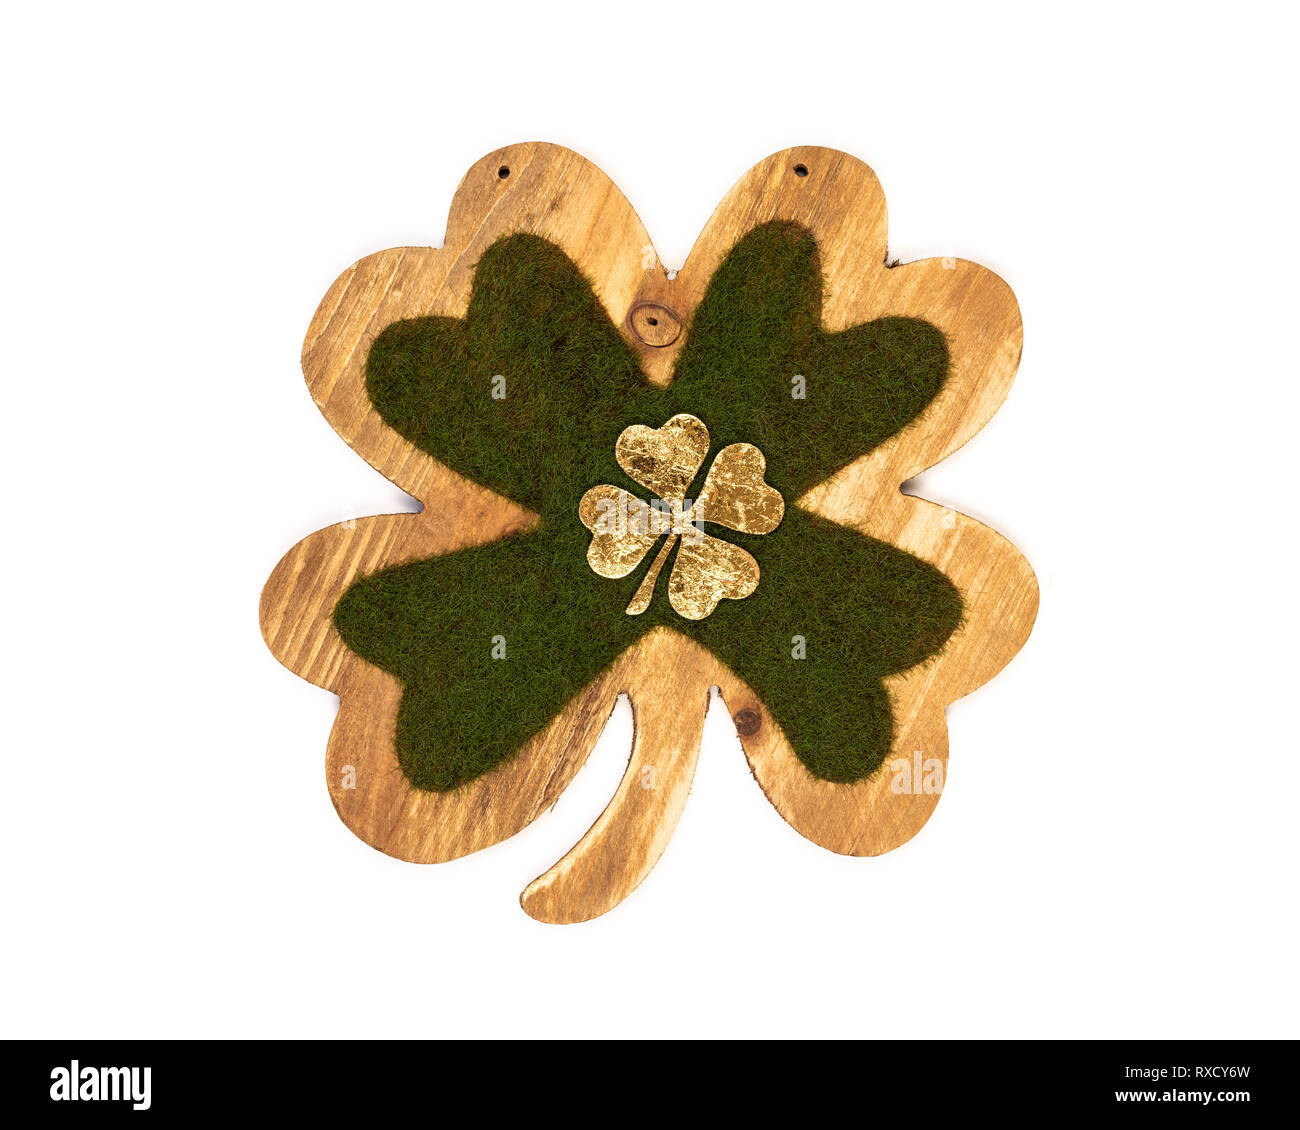 Decorated St Patricks day shamrock clover leaf isolated on a white background. Stock Photo